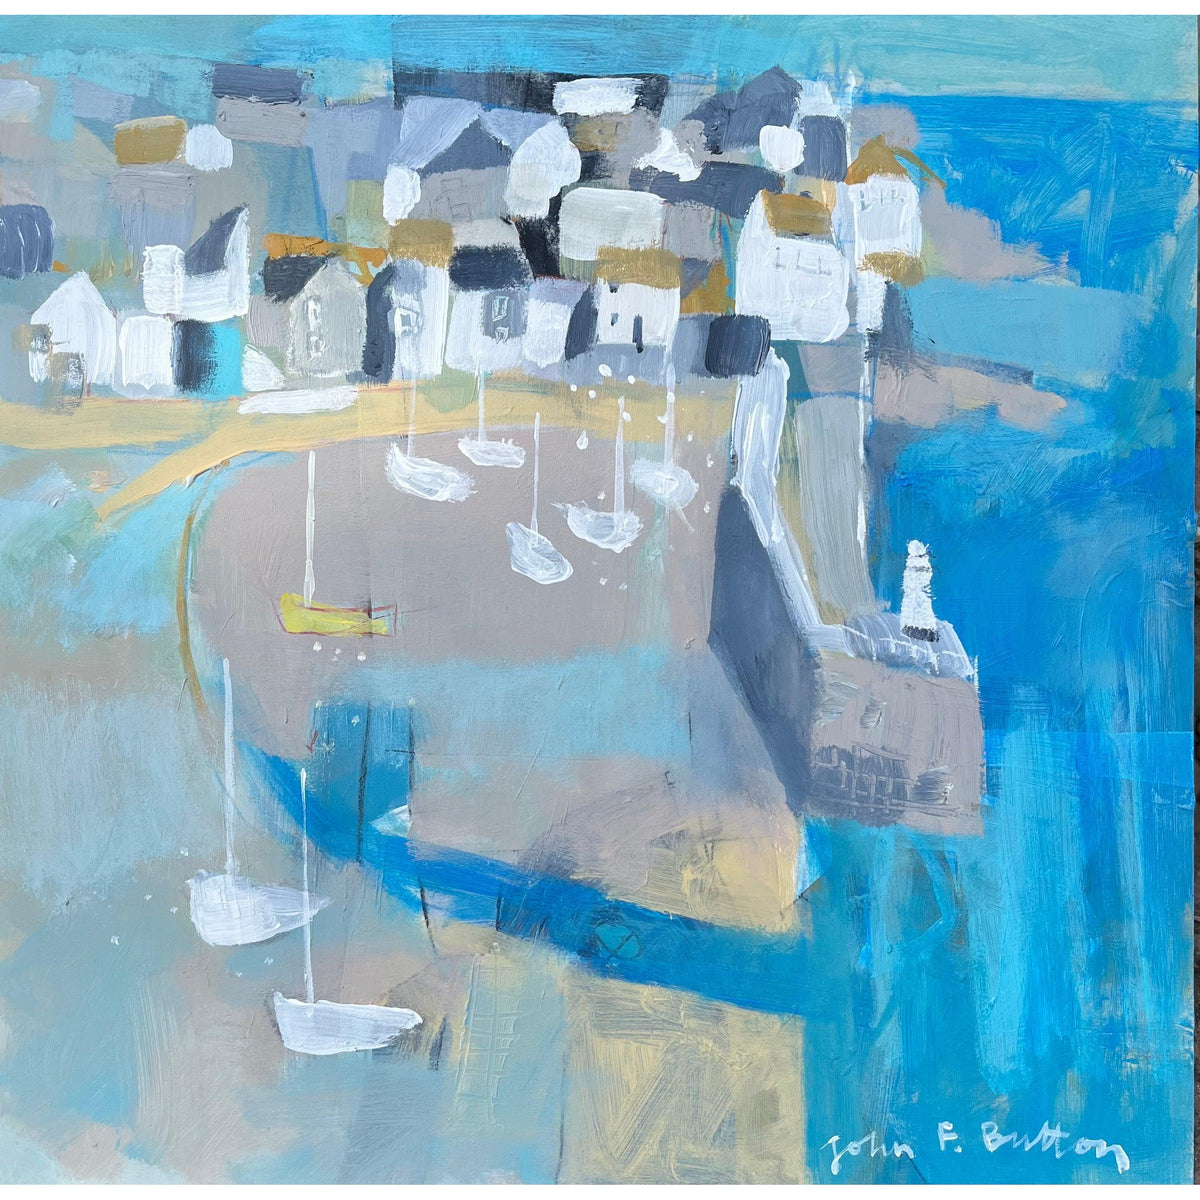 A Summer to Remember by John Button, mixed media original, available at Padstow Gallery, Cornwall